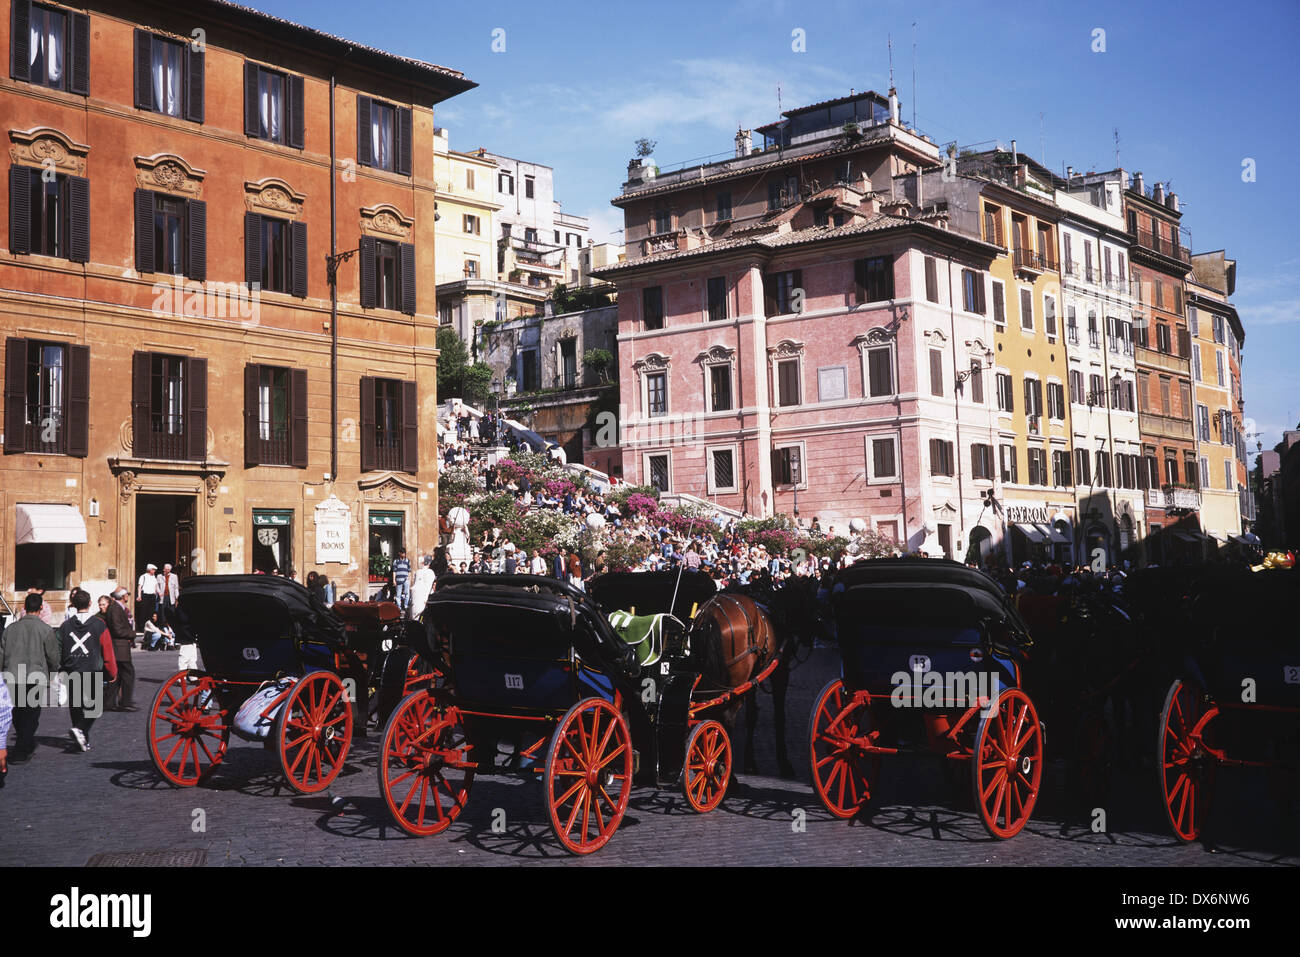 ITALY - Horse carriages in old town, Rome. Stock Photo